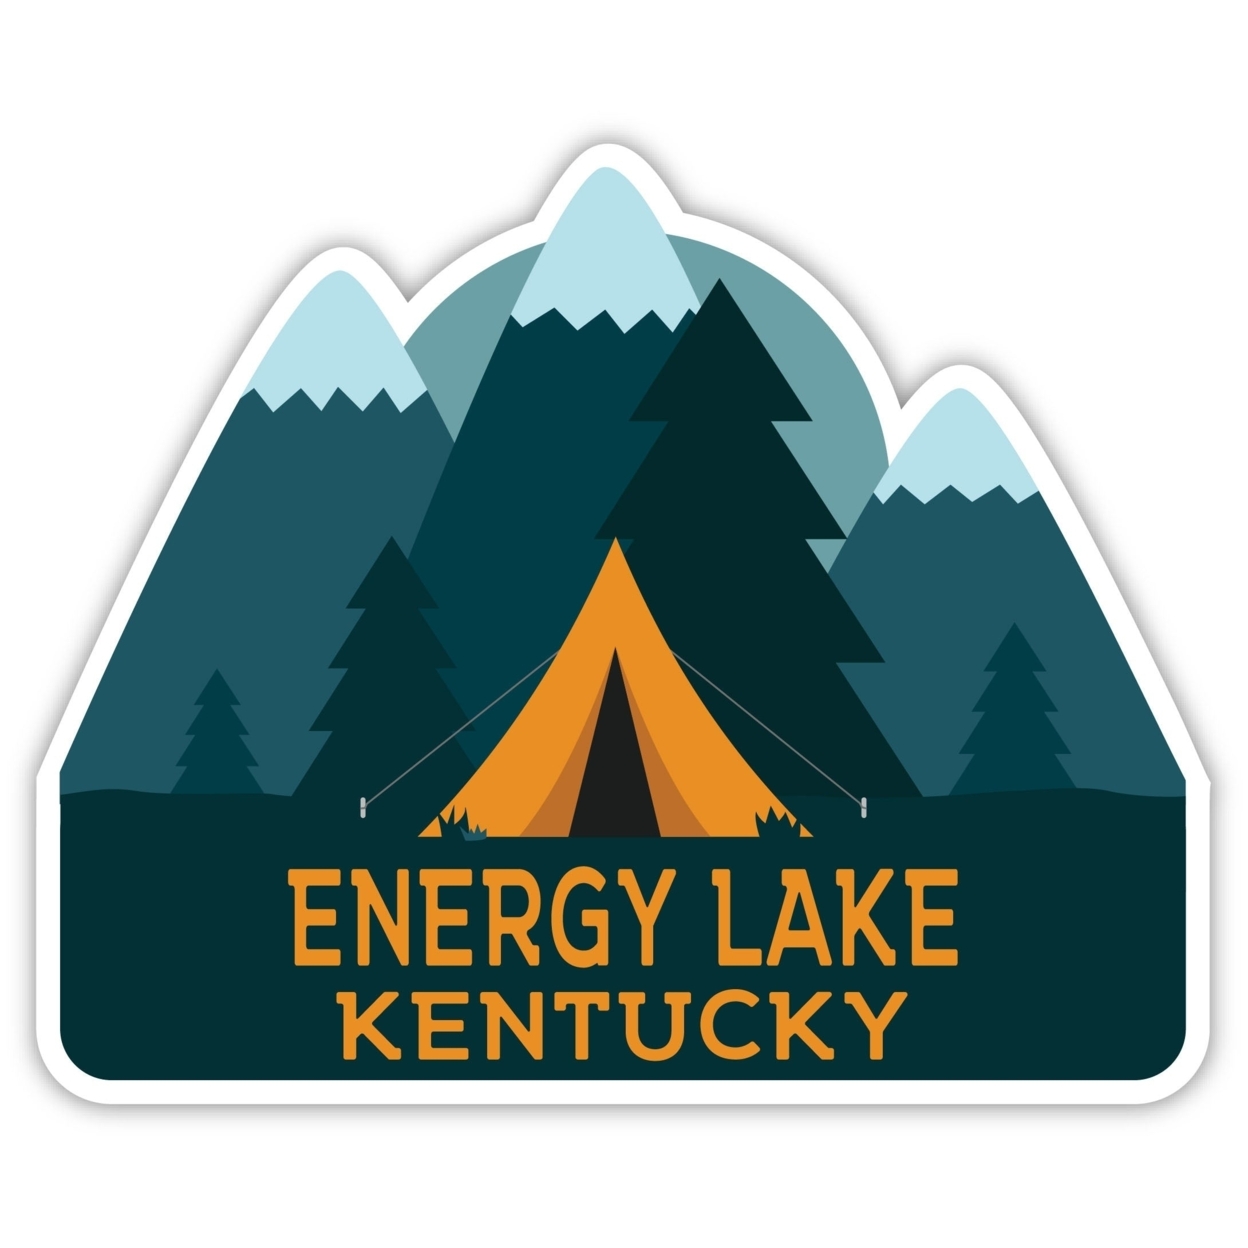 Energy Lake Kentucky Souvenir Decorative Stickers (Choose Theme And Size) - 4-Pack, 12-Inch, Tent